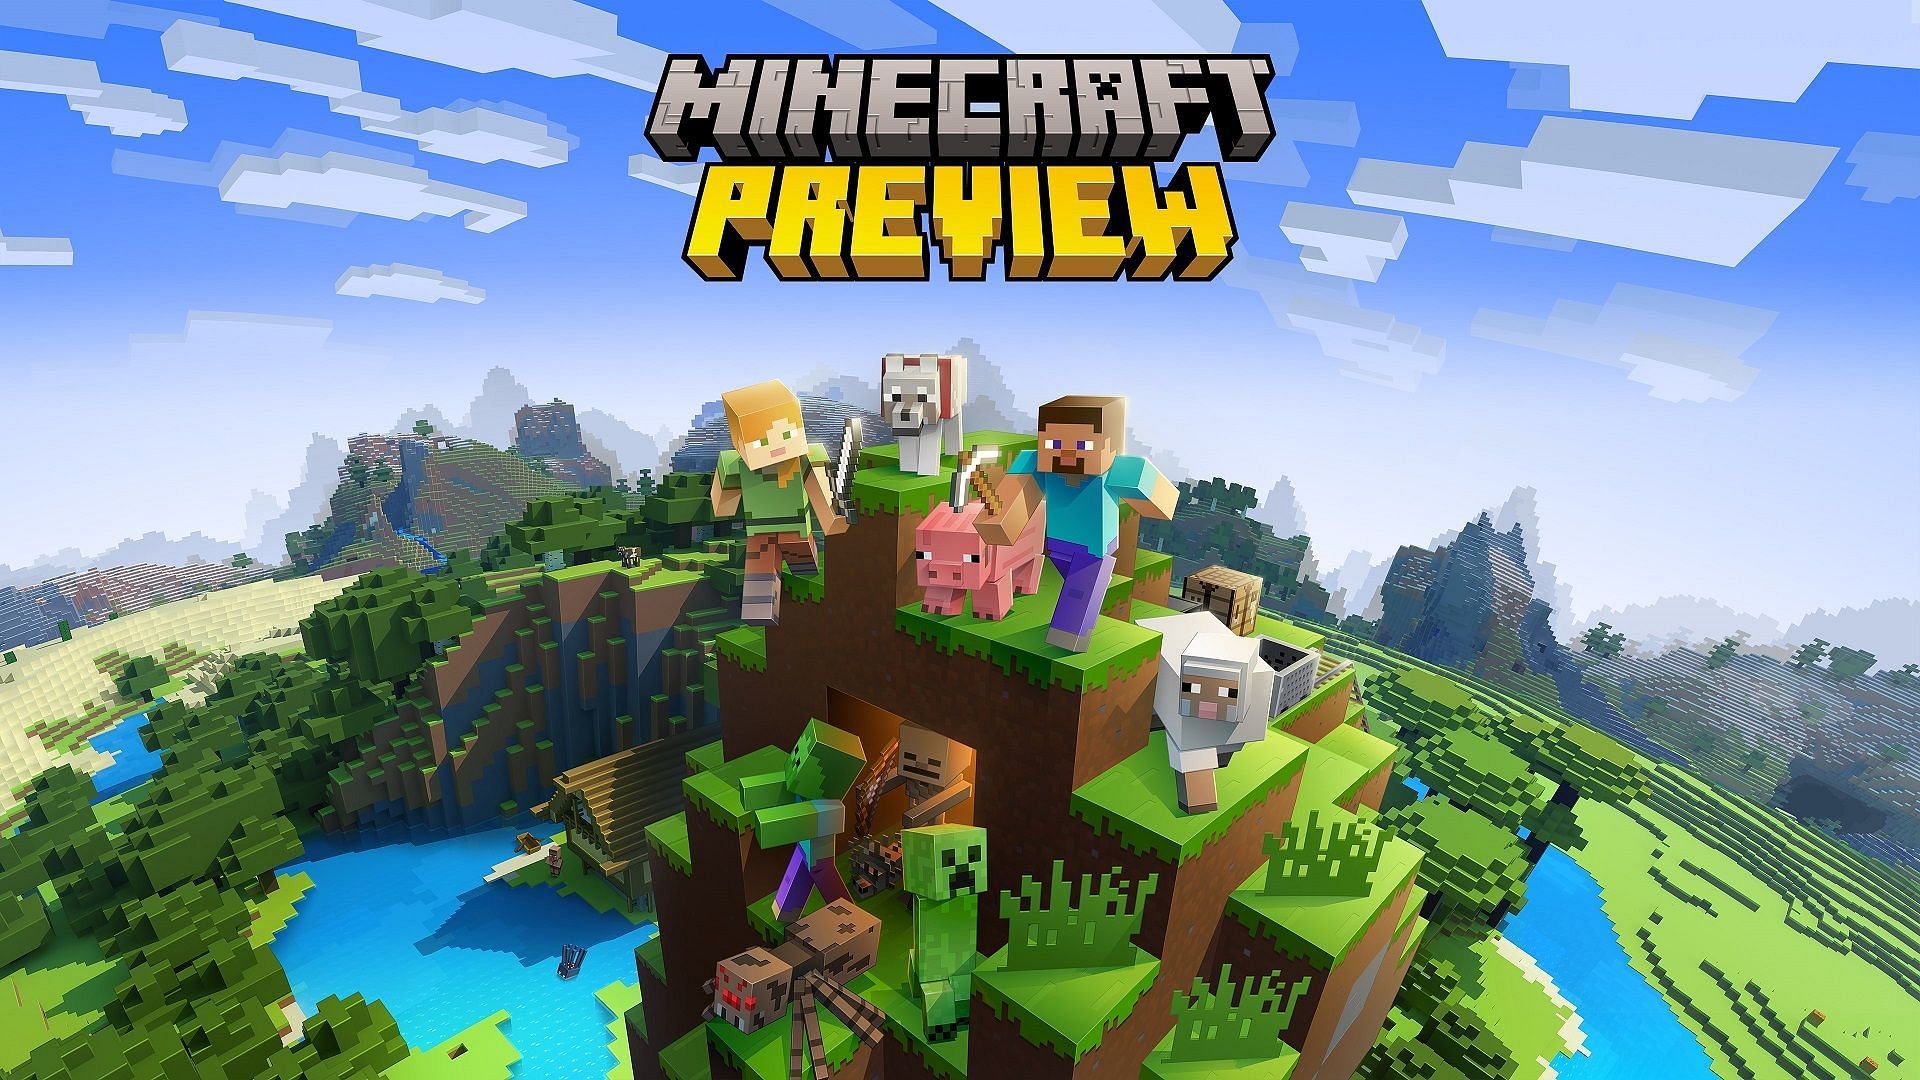 Minecraft will get natively playable on PlayStation 5 with a preview launch